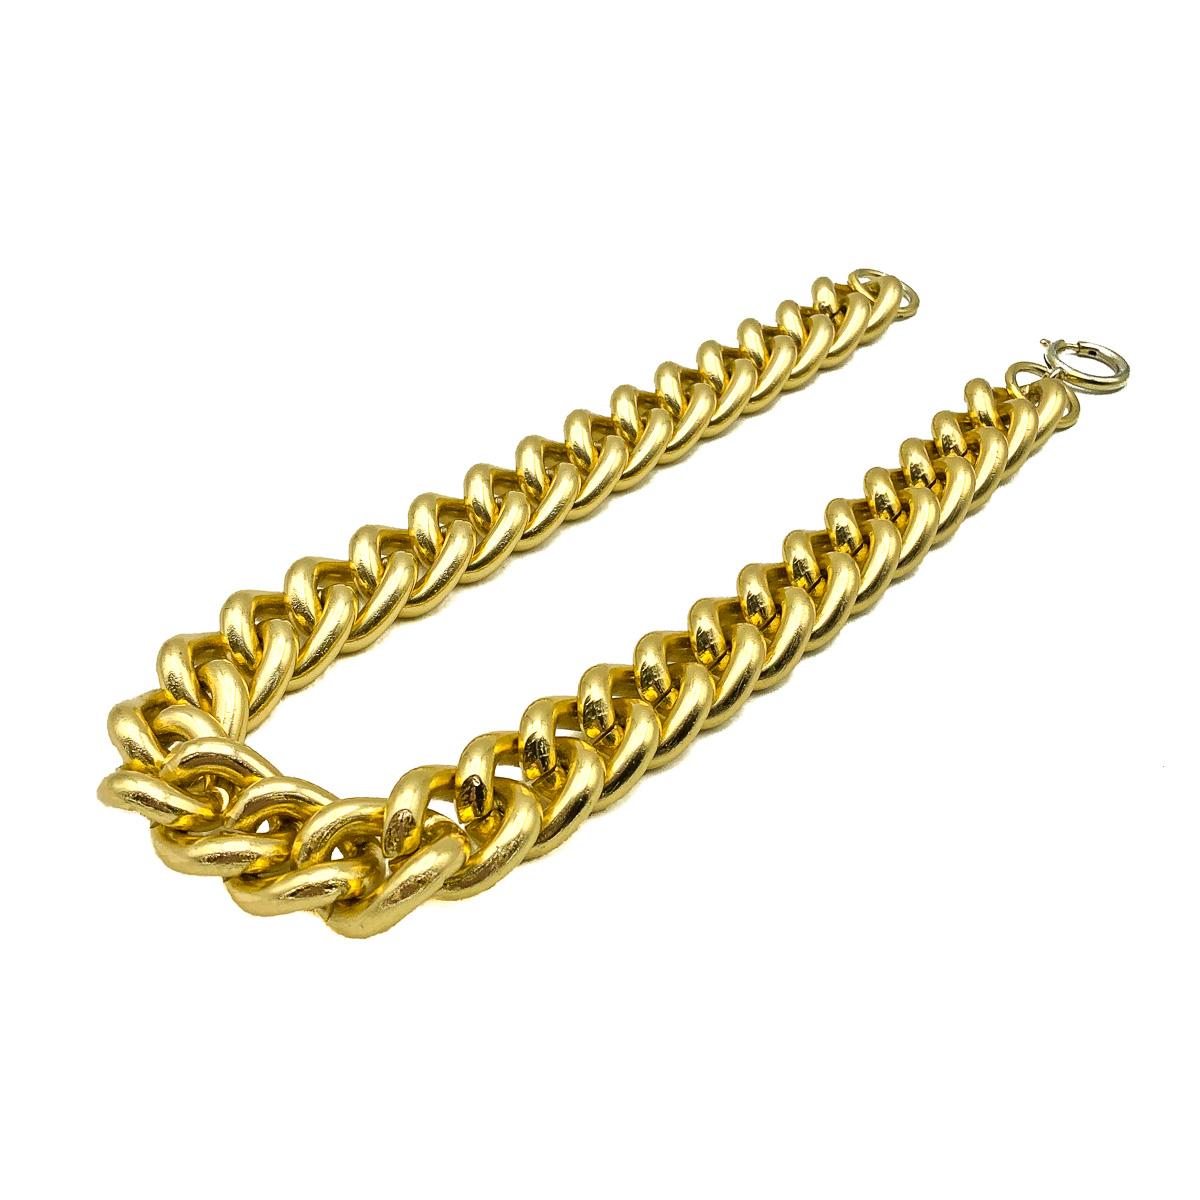 A Vintage Gold Chunky Curb Chain. Crafted in gold plated metal. Substantial and wonderful quality. Very good vintage condition, 44cms. Wonderfully stylish for all occasions. 

Established in 2016, this is a British brand that is already making a